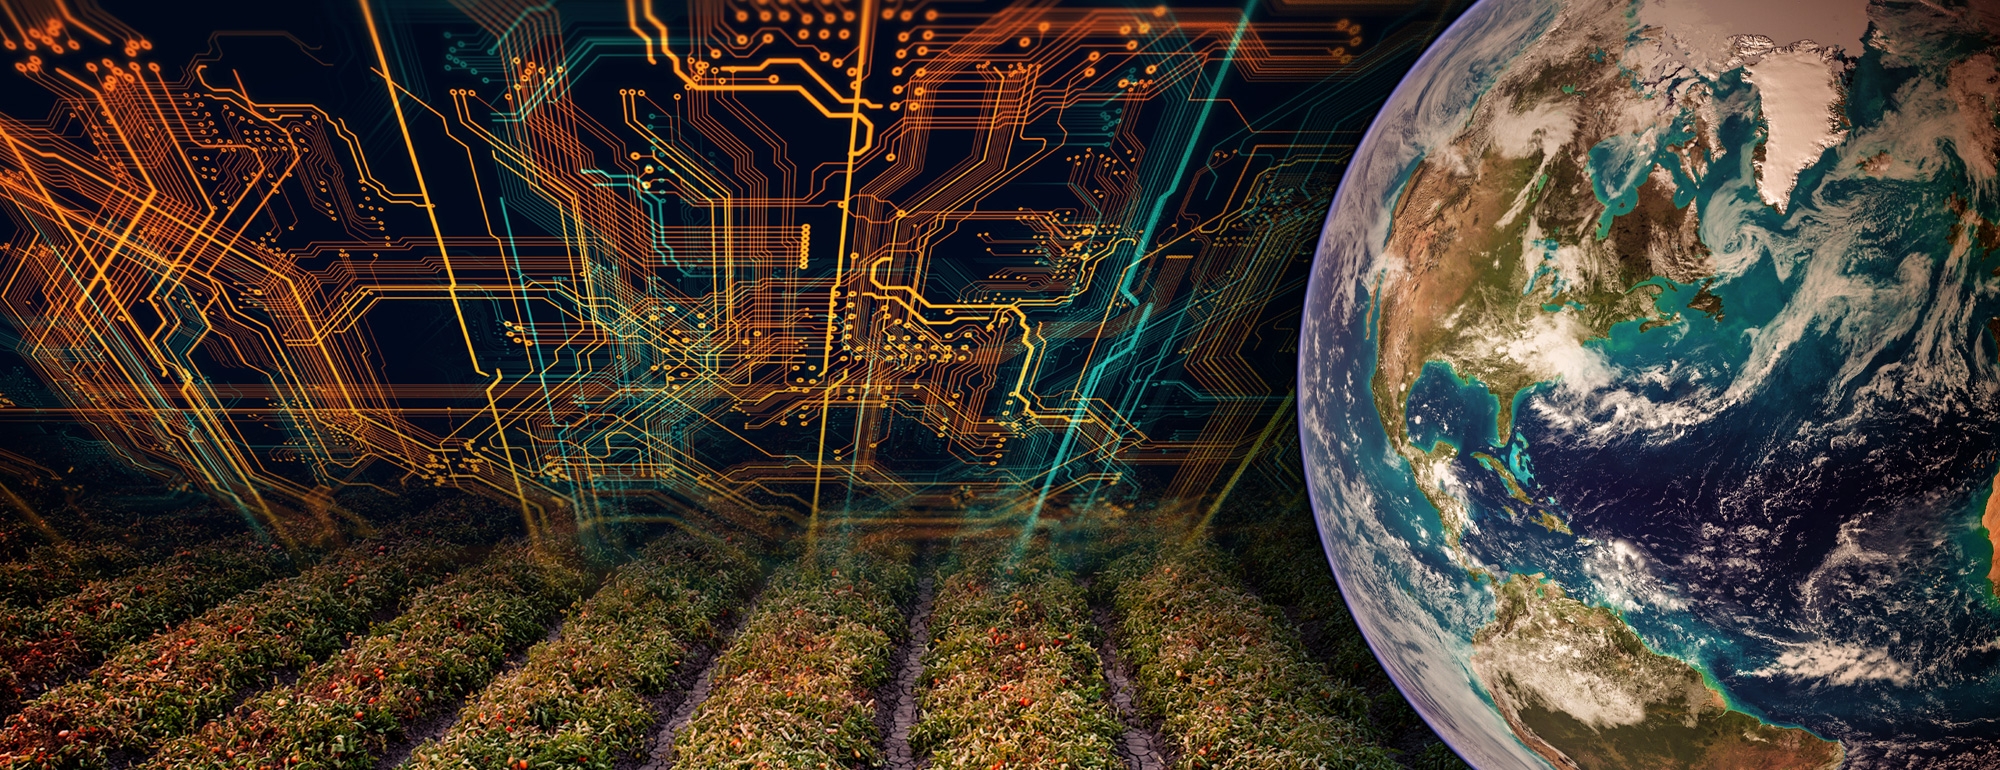 Circuit board, agriculture field and globe collage